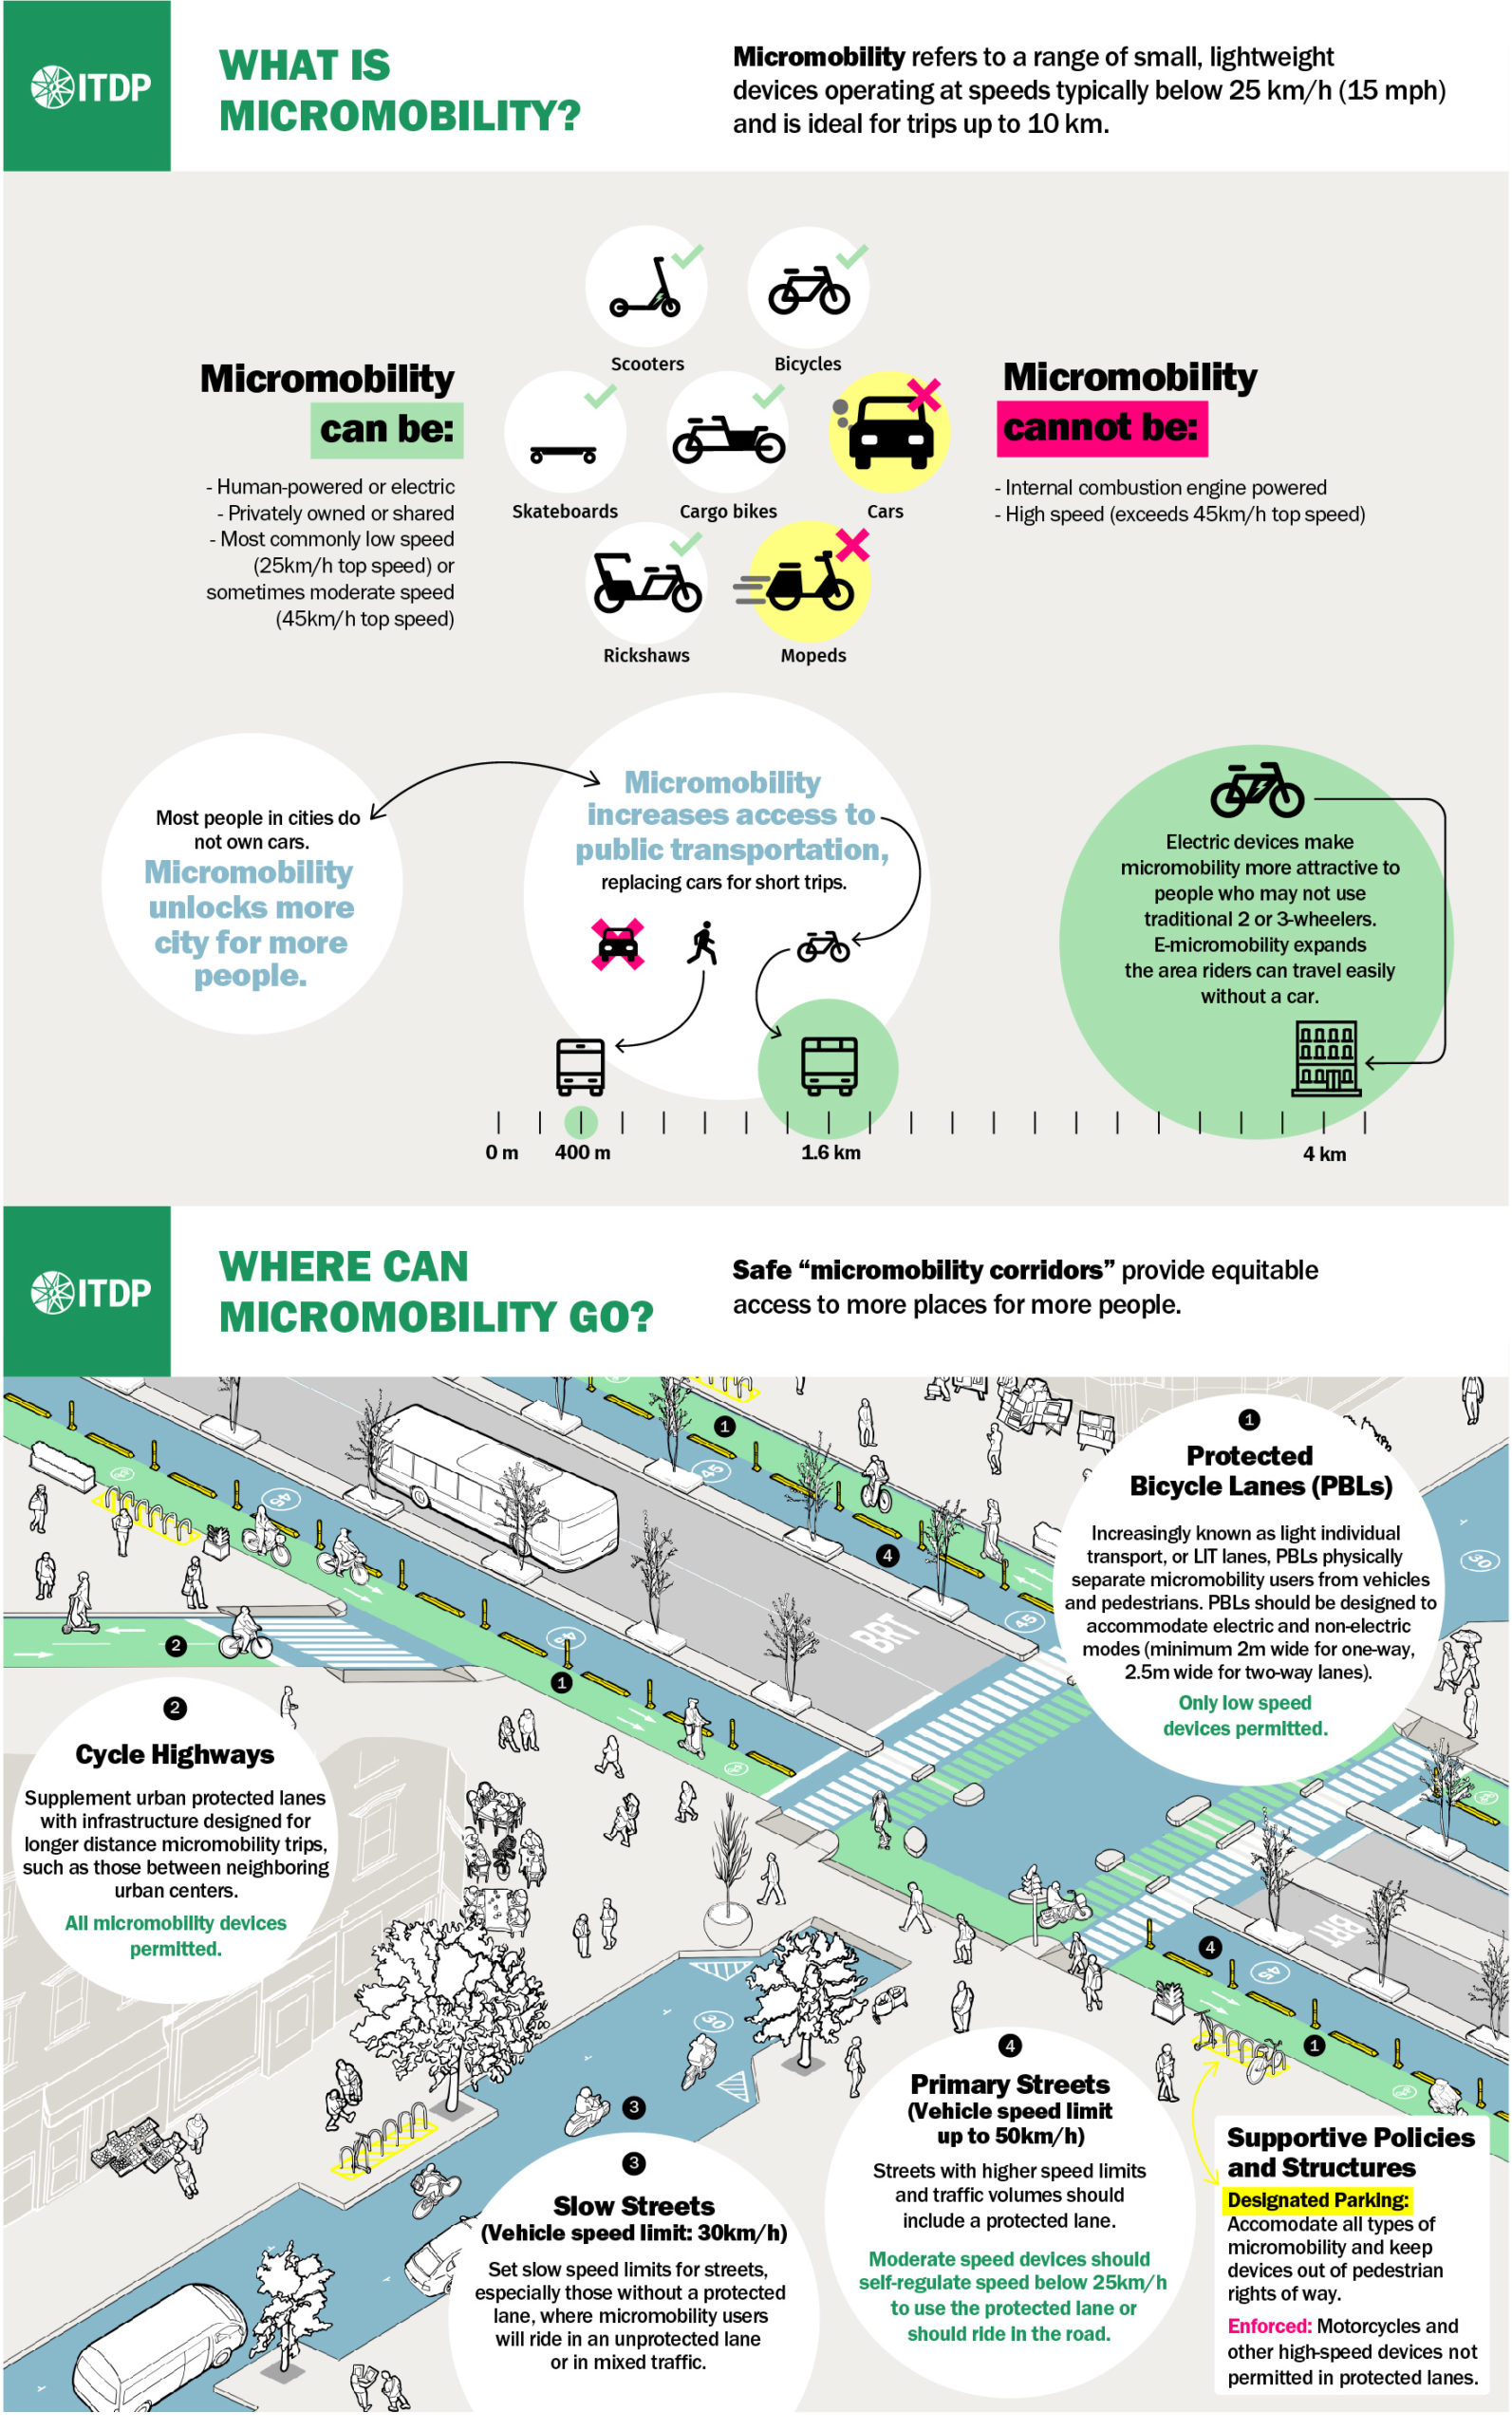 ITDP's infographic on micromobility